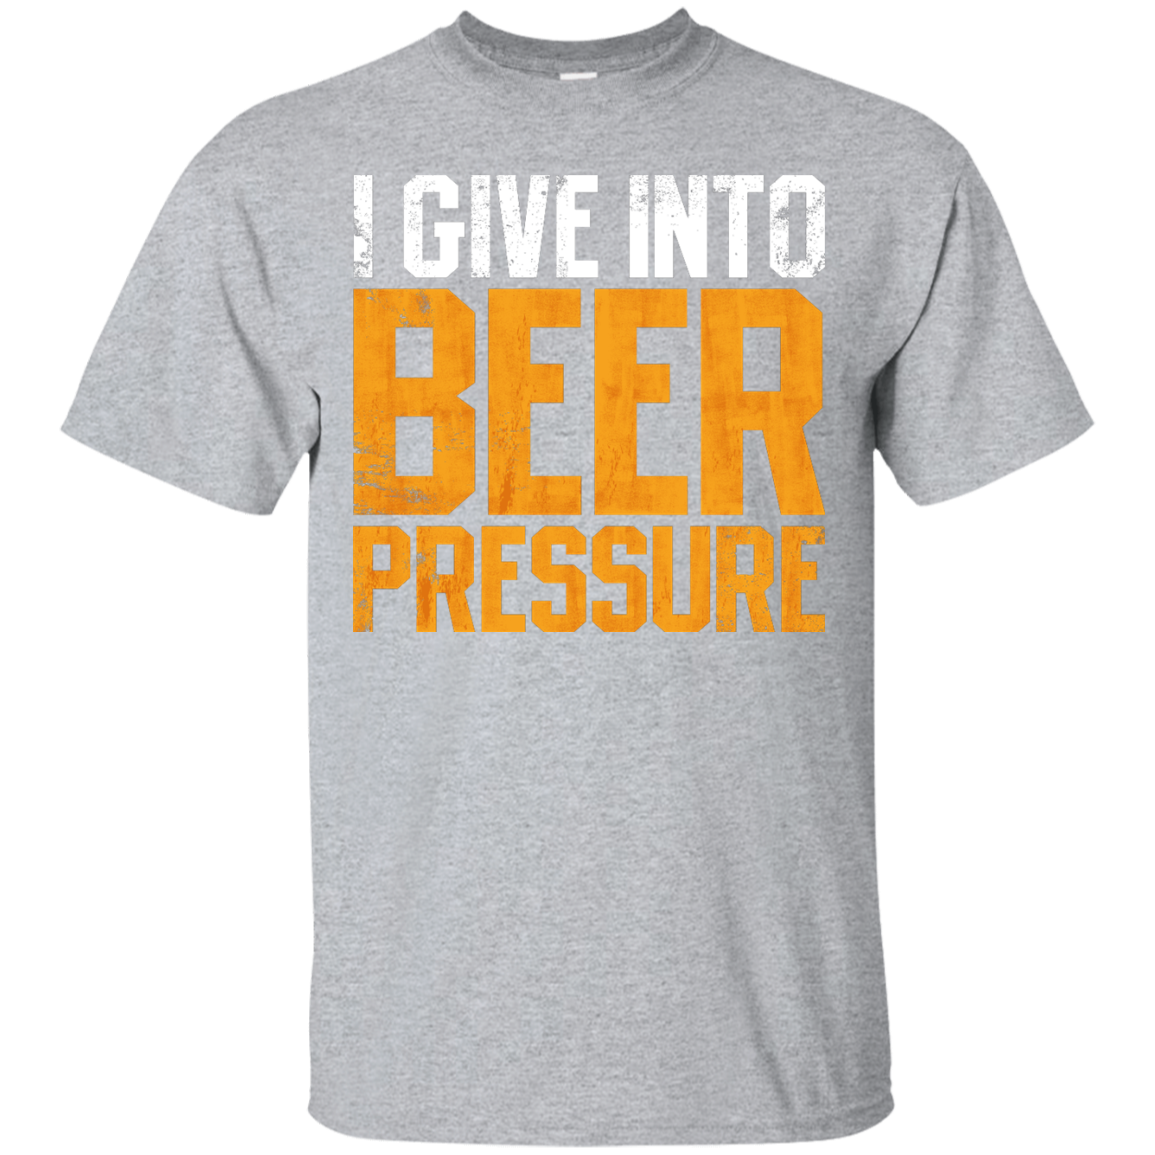 I Give Into Beer Pressure T-Shirt Apparel - The Beer Lodge